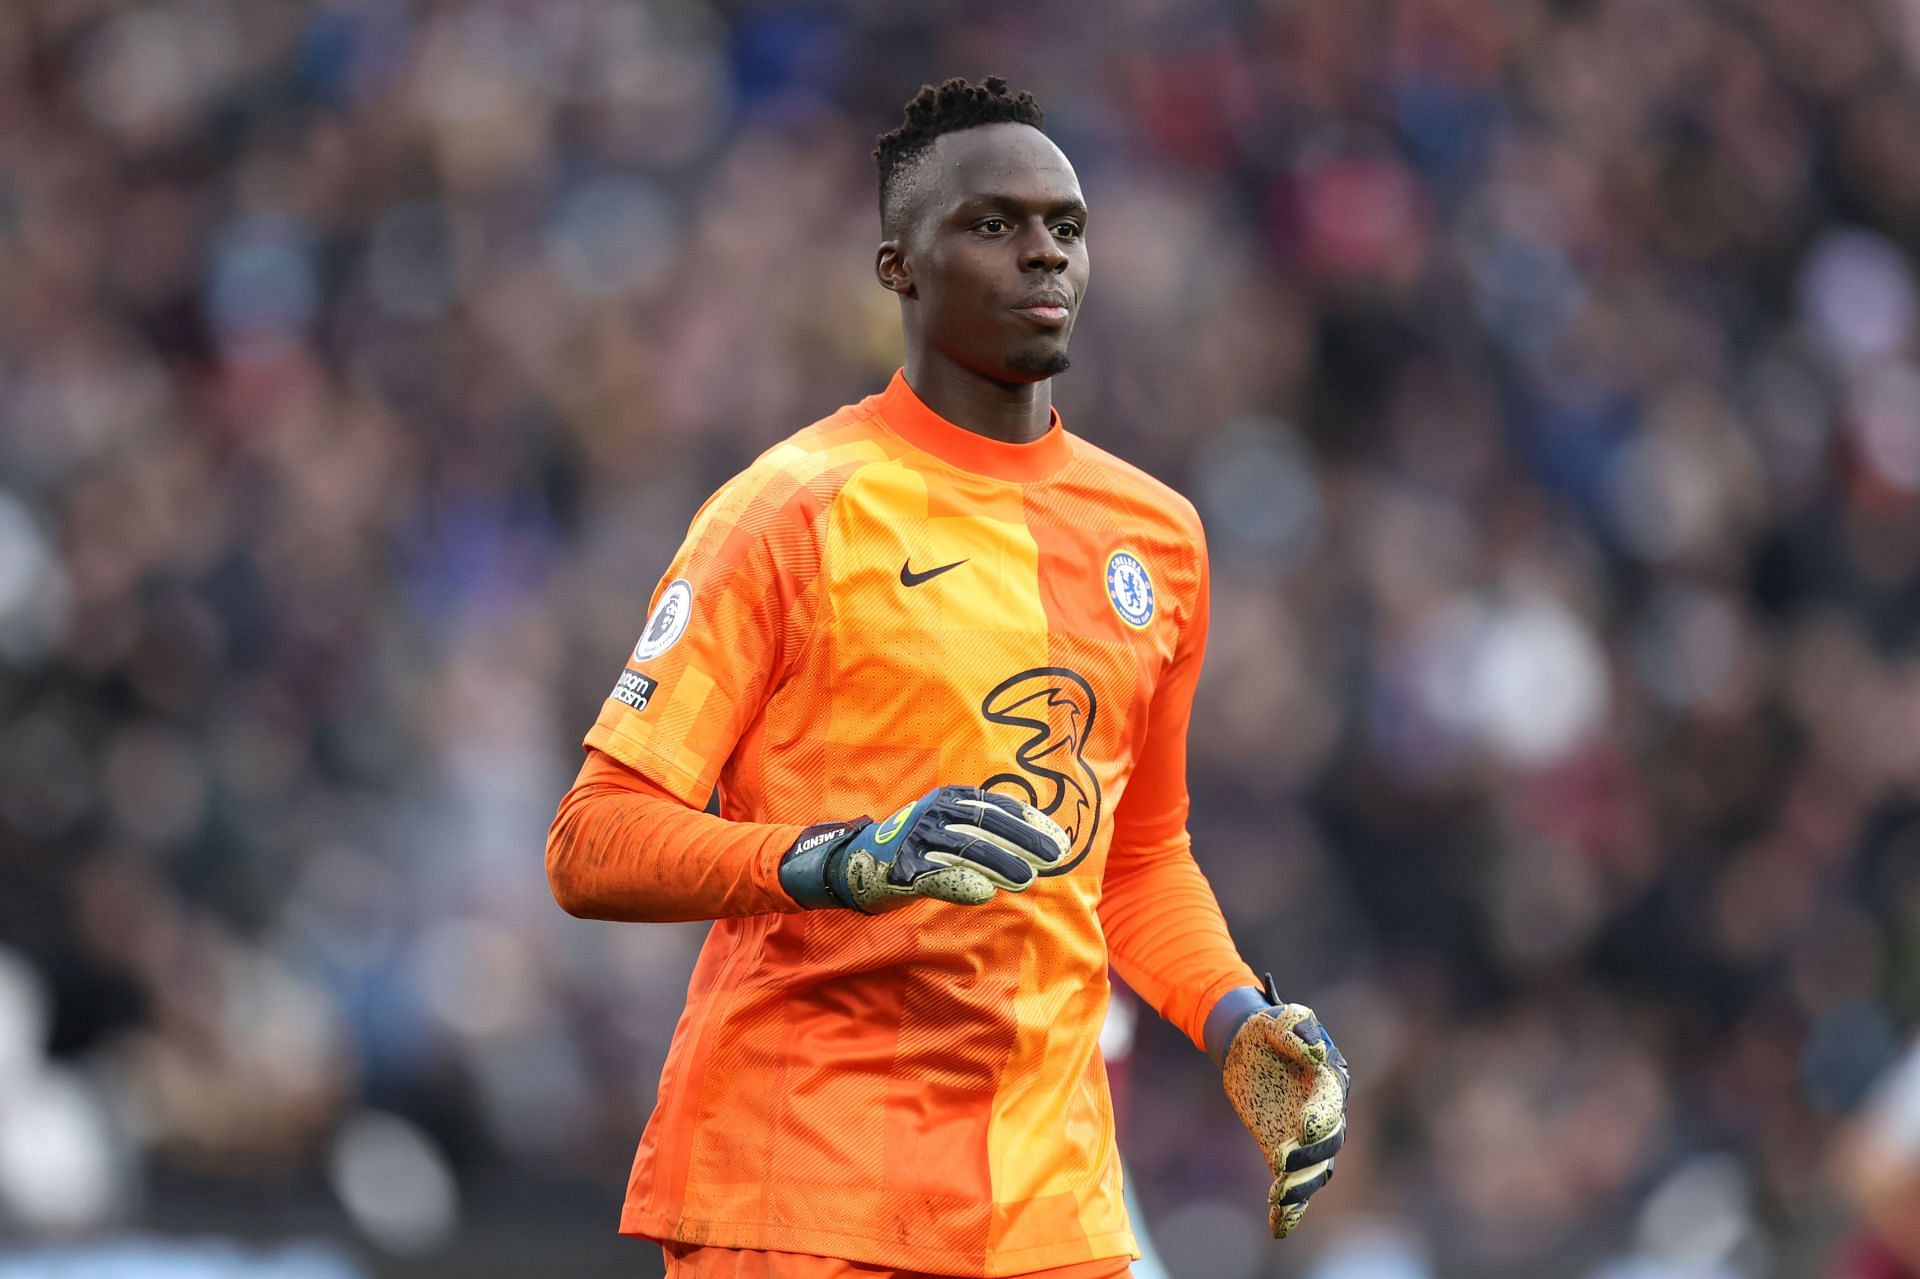 Chelsea&#039;s Edouard Mendy deserved a place ahead of Gianluigi Donnarumma in the FIFPro XI.